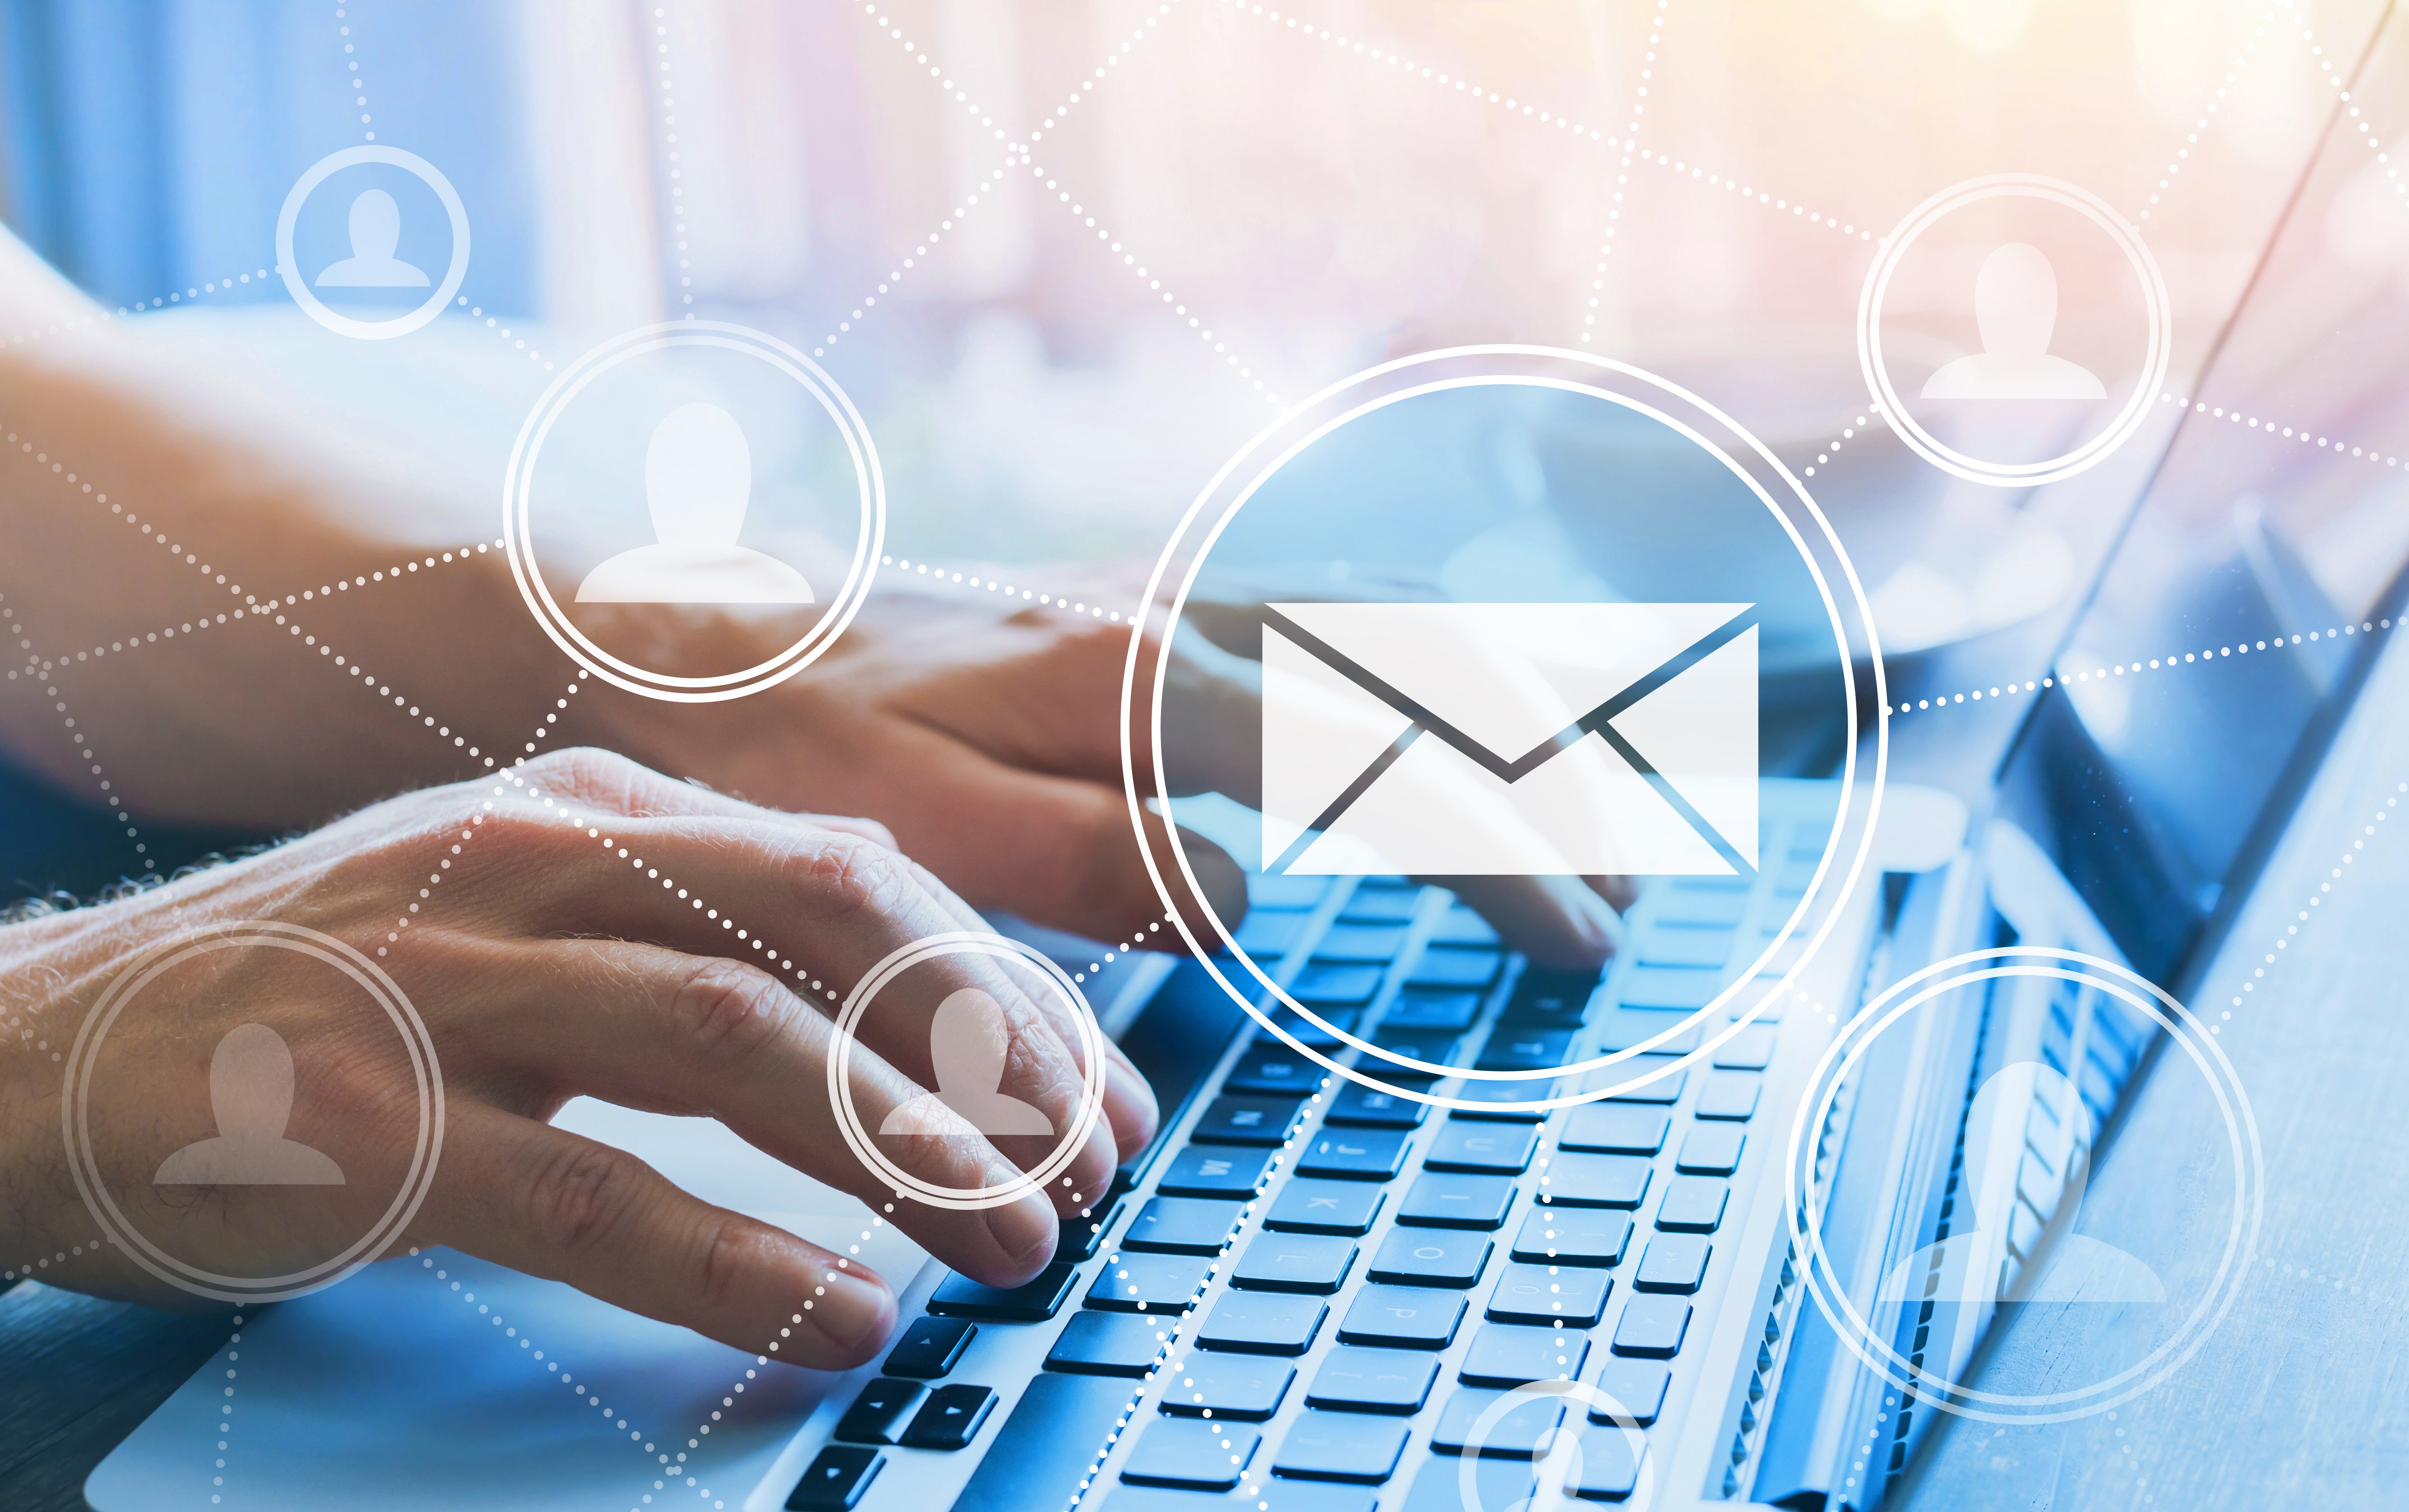 Email marketing services to connect with customers